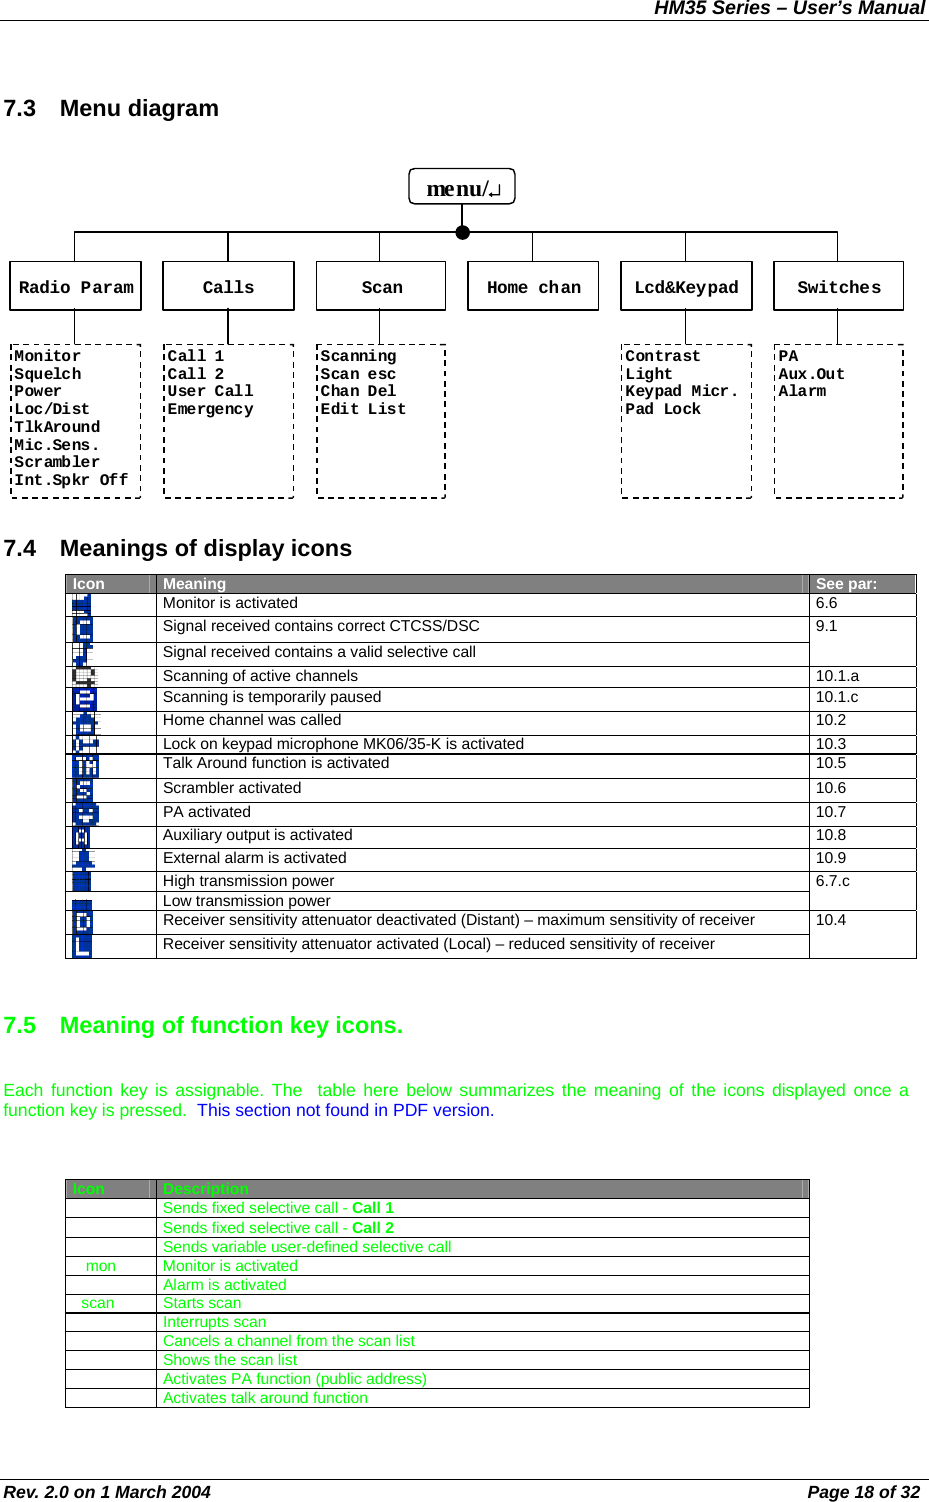 HM35 Series – User’s Manual Rev. 2.0 on 1 March 2004  Page 18 of 32 7.3 Menu diagram 7.4  Meanings of display icons Icon  Meaning  See par:  Monitor is activated  6.6  Signal received contains correct CTCSS/DSC  Signal received contains a valid selective call 9.1  Scanning of active channels  10.1.a  Scanning is temporarily paused  10.1.c  Home channel was called  10.2  Lock on keypad microphone MK06/35-K is activated  10.3  Talk Around function is activated  10.5  Scrambler activated  10.6  PA activated  10.7  Auxiliary output is activated  10.8  External alarm is activated  10.9  High transmission power  Low transmission power 6.7.c  Receiver sensitivity attenuator deactivated (Distant) – maximum sensitivity of receiver  Receiver sensitivity attenuator activated (Local) – reduced sensitivity of receiver 10.4  7.5  Meaning of function key icons. Each function key is assignable. The  table here below summarizes the meaning of the icons displayed once a function key is pressed.  This section not found in PDF version.   Icon  Description  Sends fixed selective call - Call 1  Sends fixed selective call - Call 2   Sends variable user-defined selective call    mon  Monitor is activated  Alarm is activated   scan  Starts scan   Interrupts scan    Cancels a channel from the scan list    Shows the scan list   Activates PA function (public address)   Activates talk around function Radio Param  Switches Scan  Lcd&amp;Keypad Calls menu/↵  Monitor Squelch Power Loc/Dist TlkAround Mic.Sens. Scrambler Int.Spkr Off  Call 1 Call 2 User Call Emergency  Scanning Scan esc Chan Del Edit List Contrast Light Keypad Micr. Pad Lock  PA Aux.Out Alarm  Home chan 